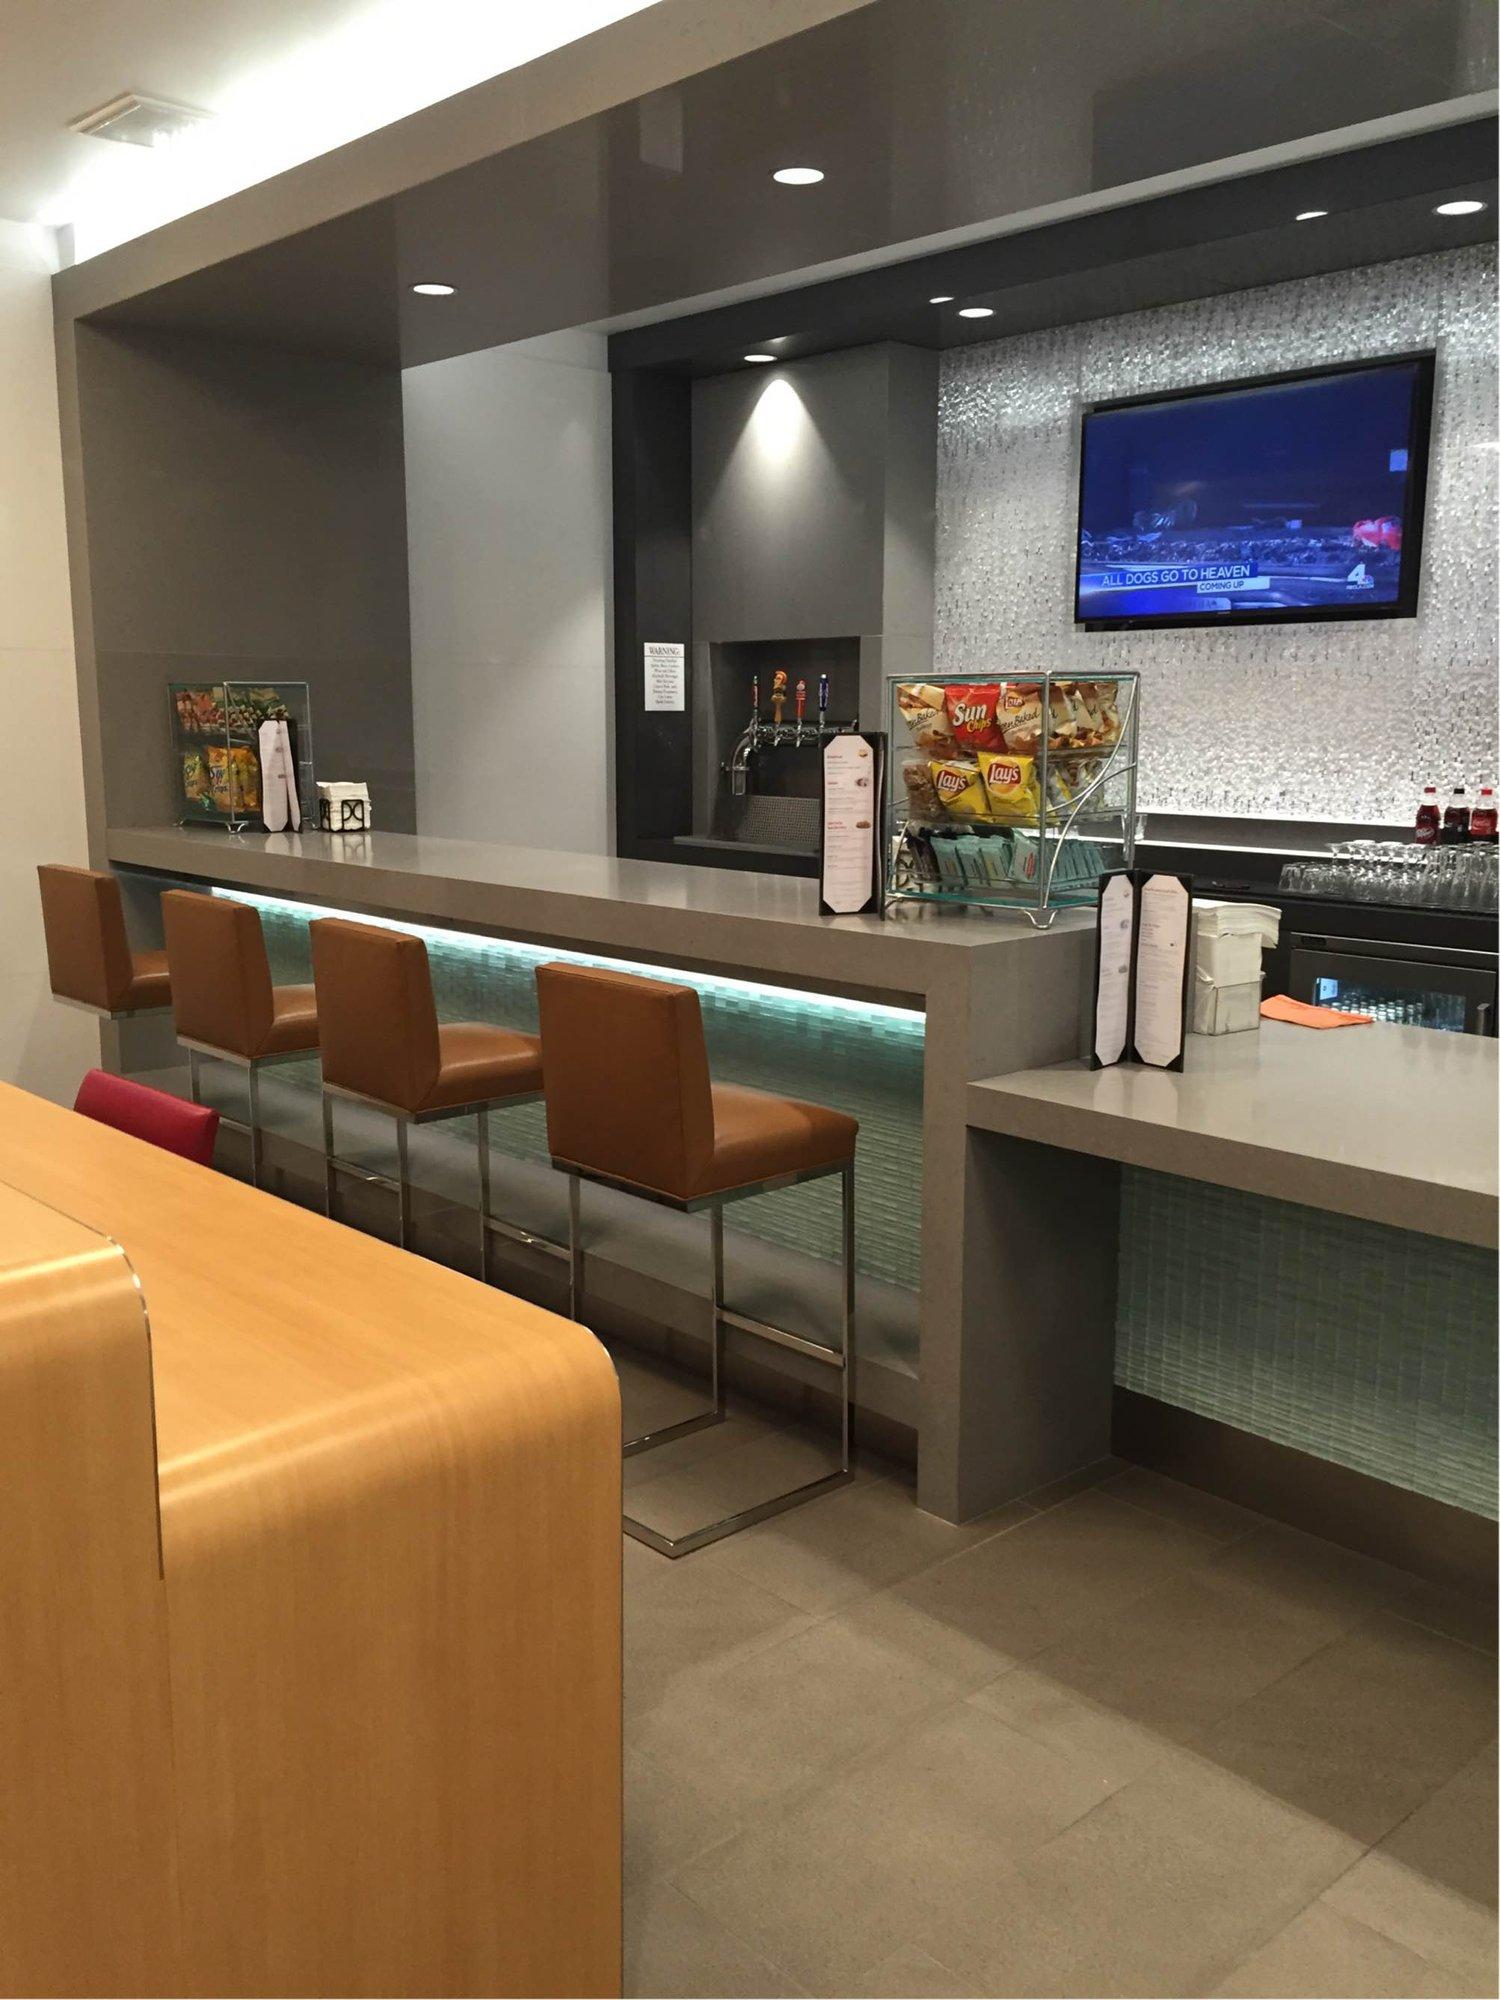 American Airlines Admirals Club image 5 of 43